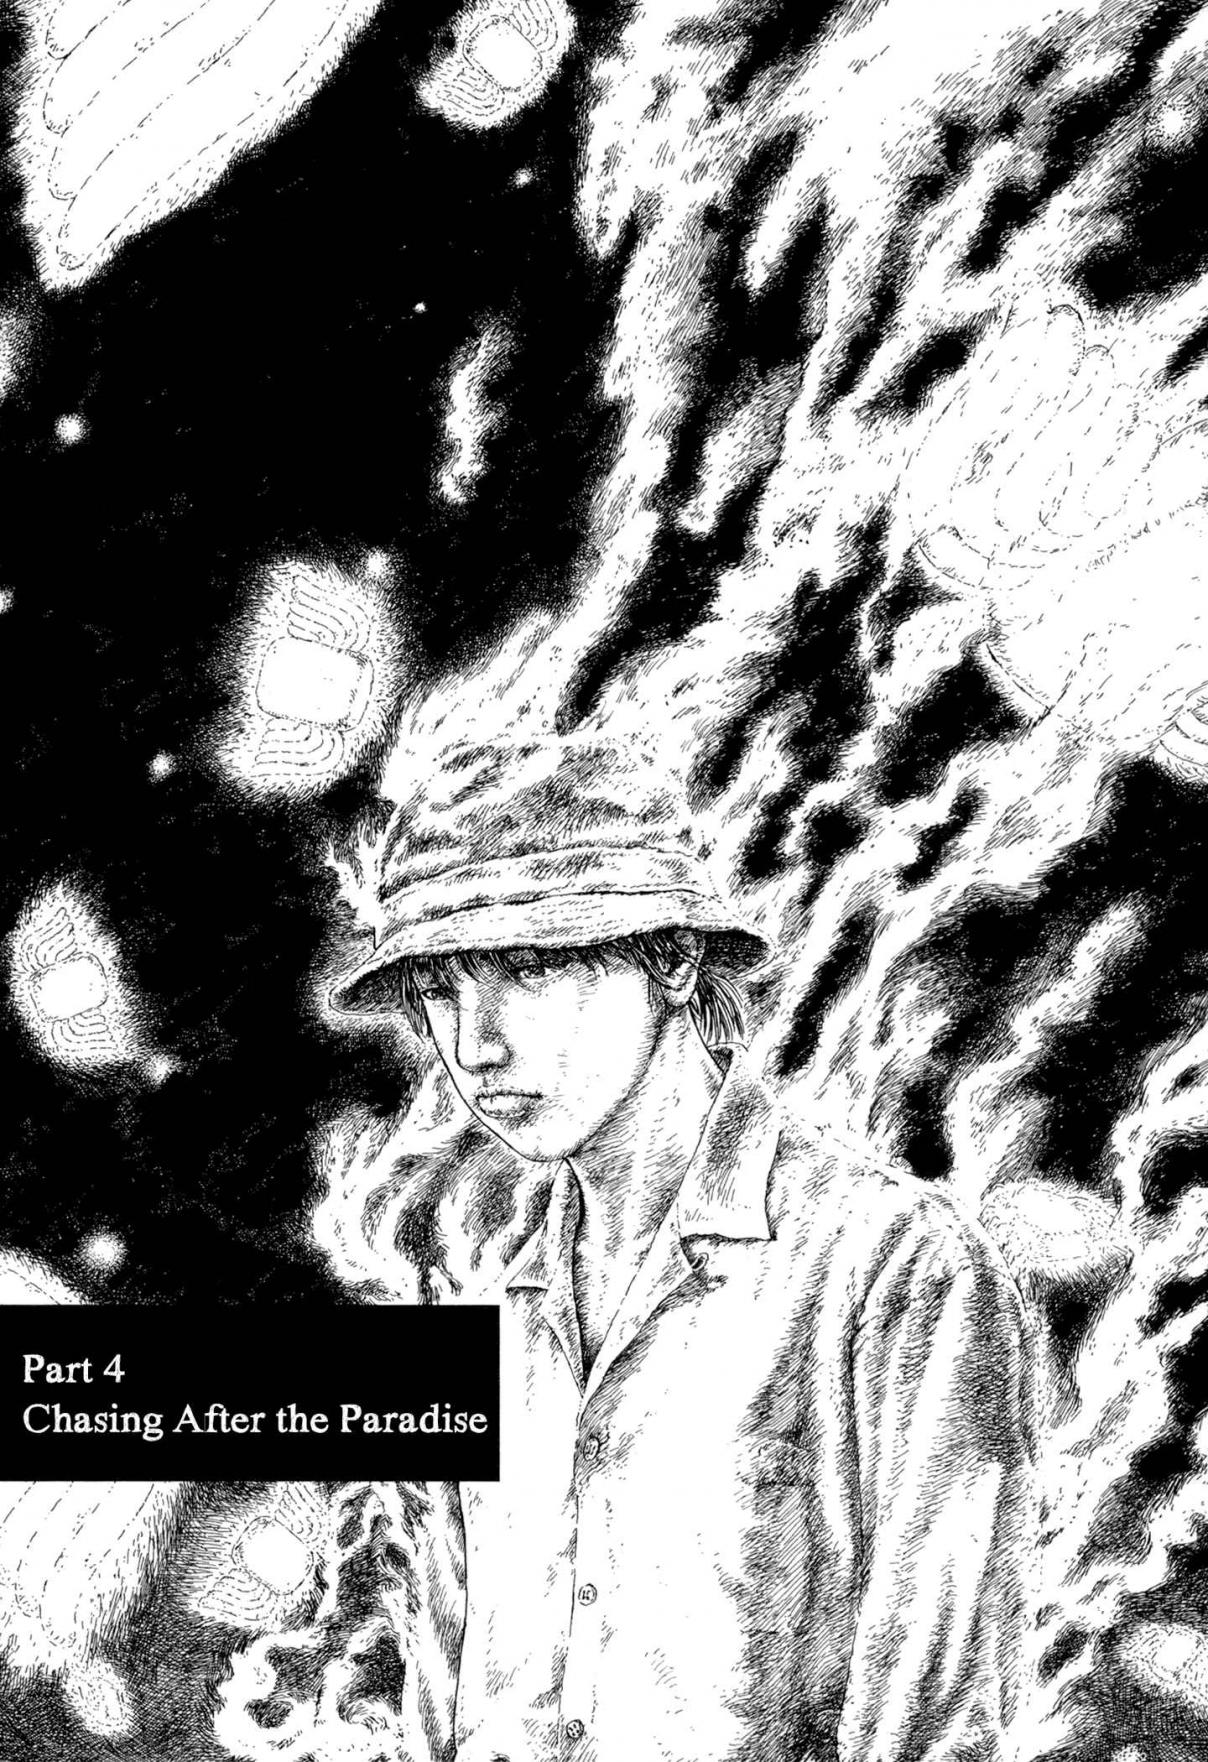 A Diffusion Disease Vol. 1 Ch. 4 Chasing After the Paradise